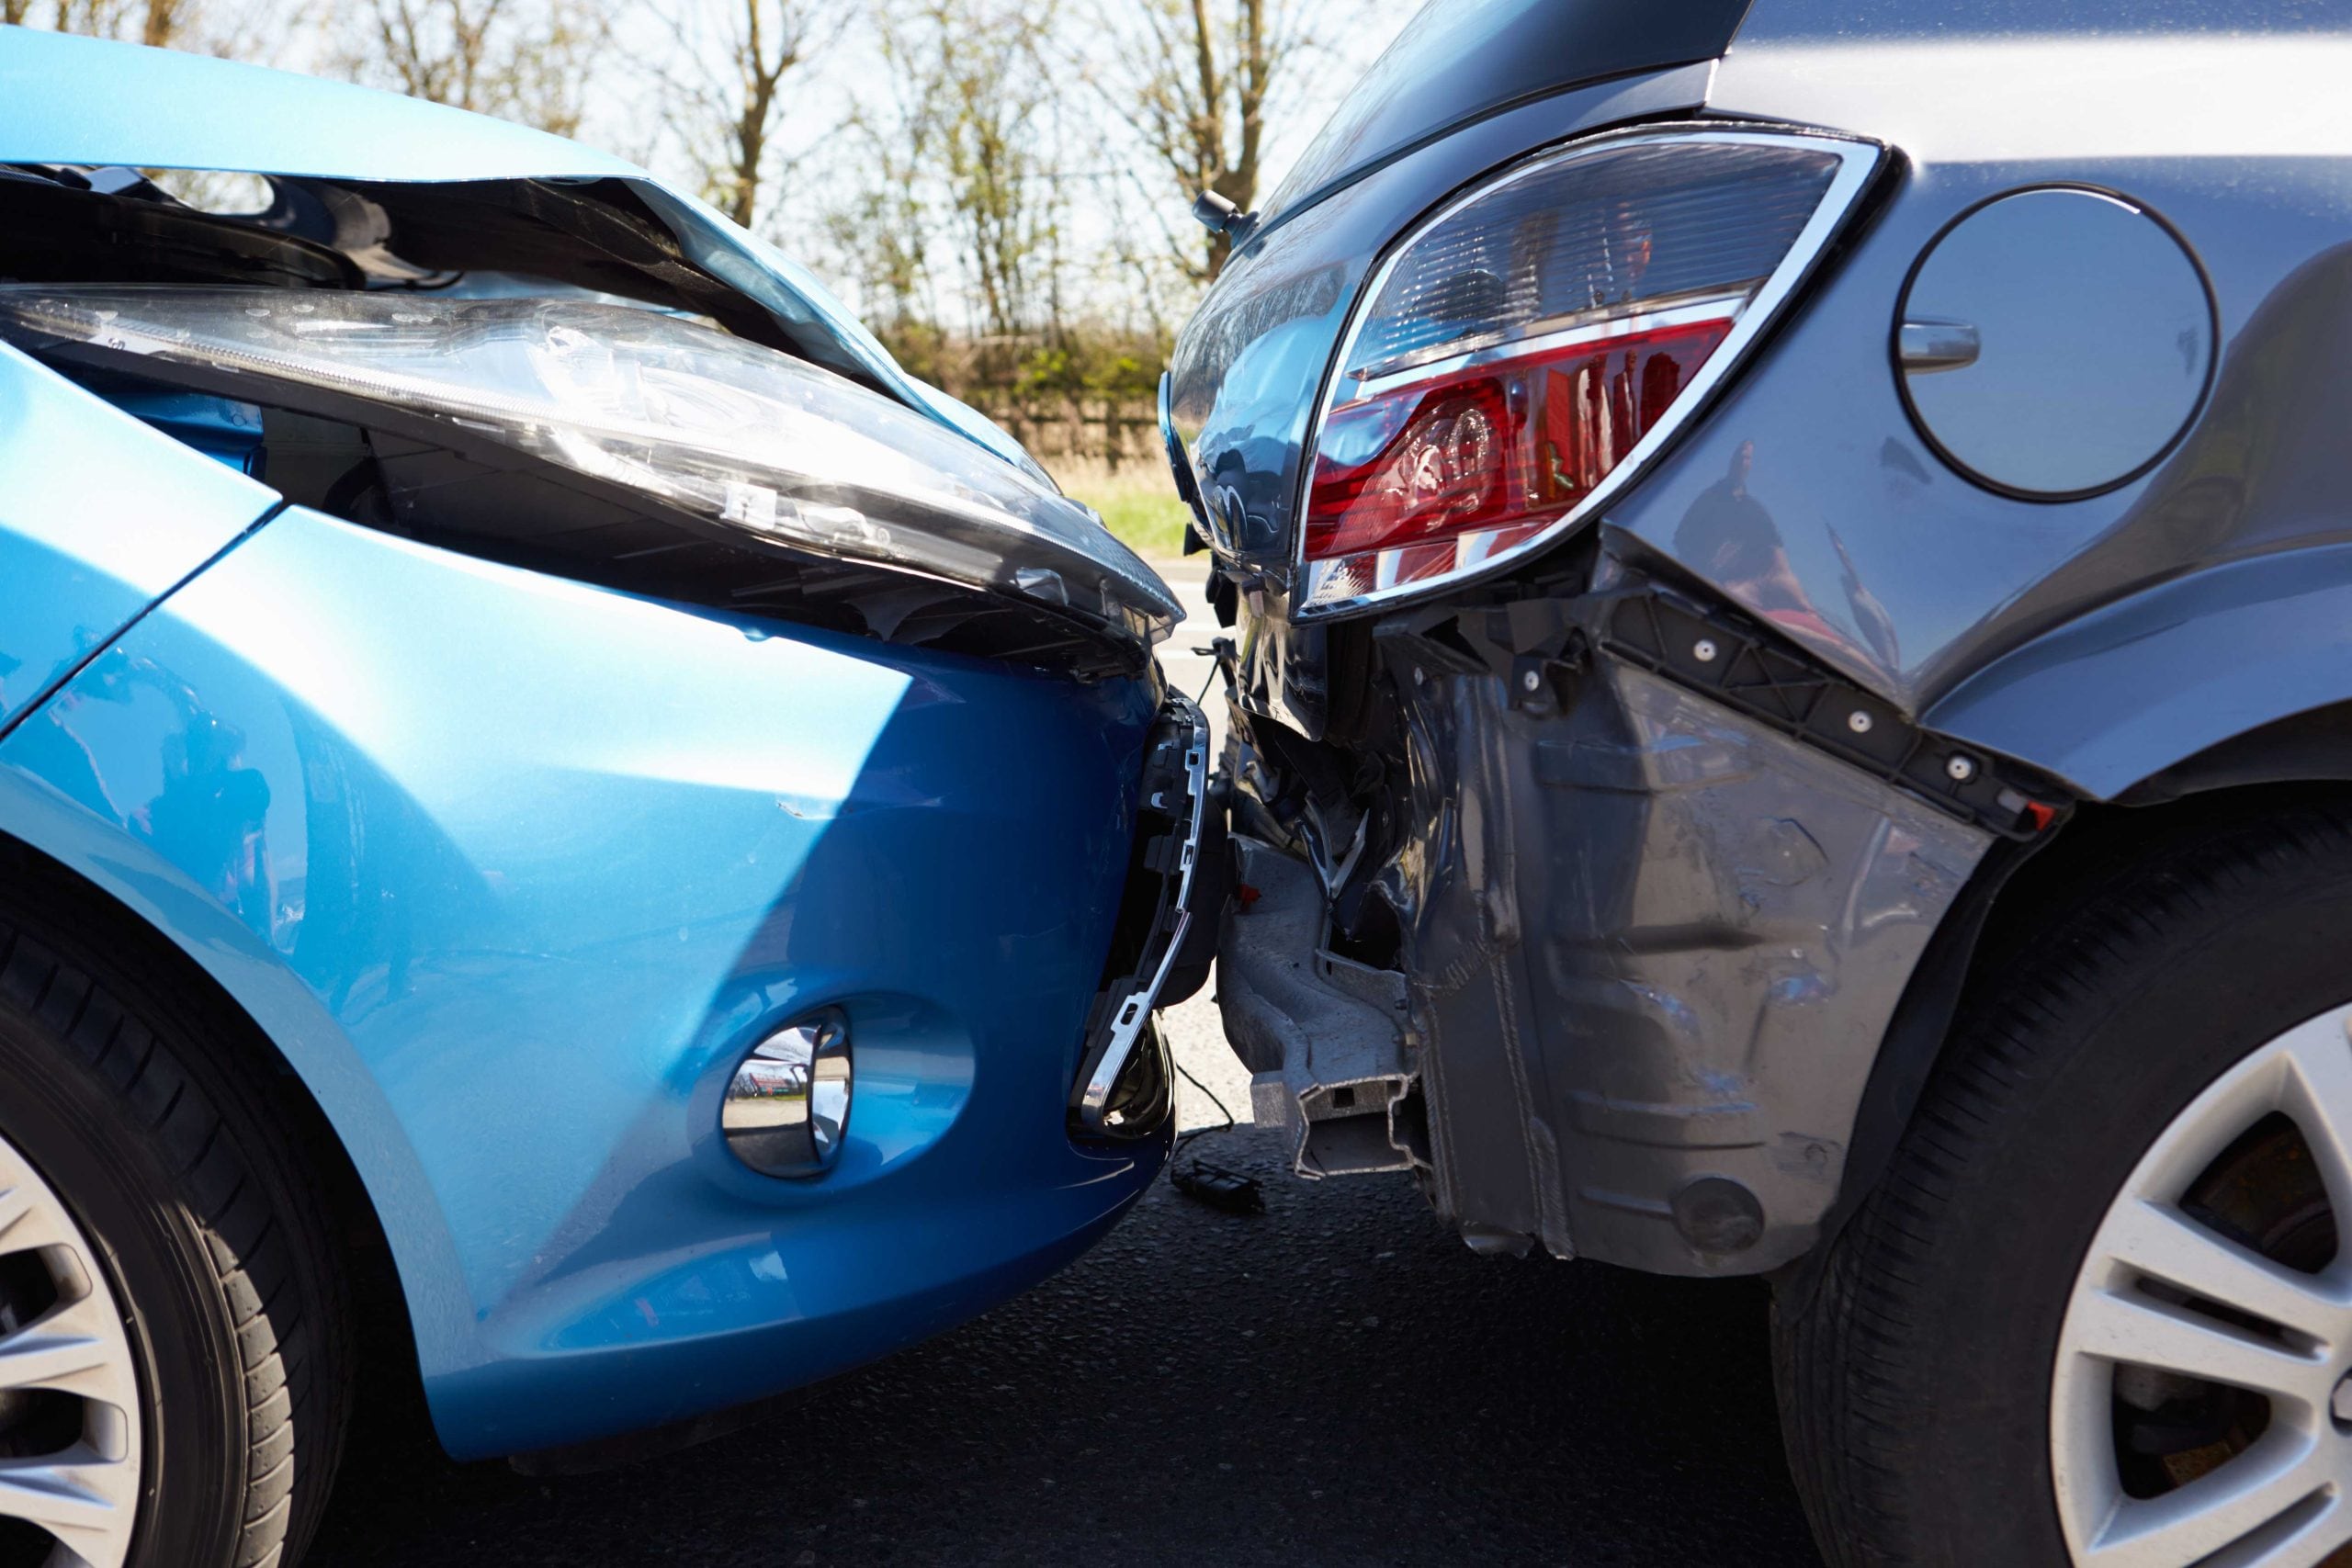 Understanding just what is SR22 Car Accident Insurance options for Peoria residents